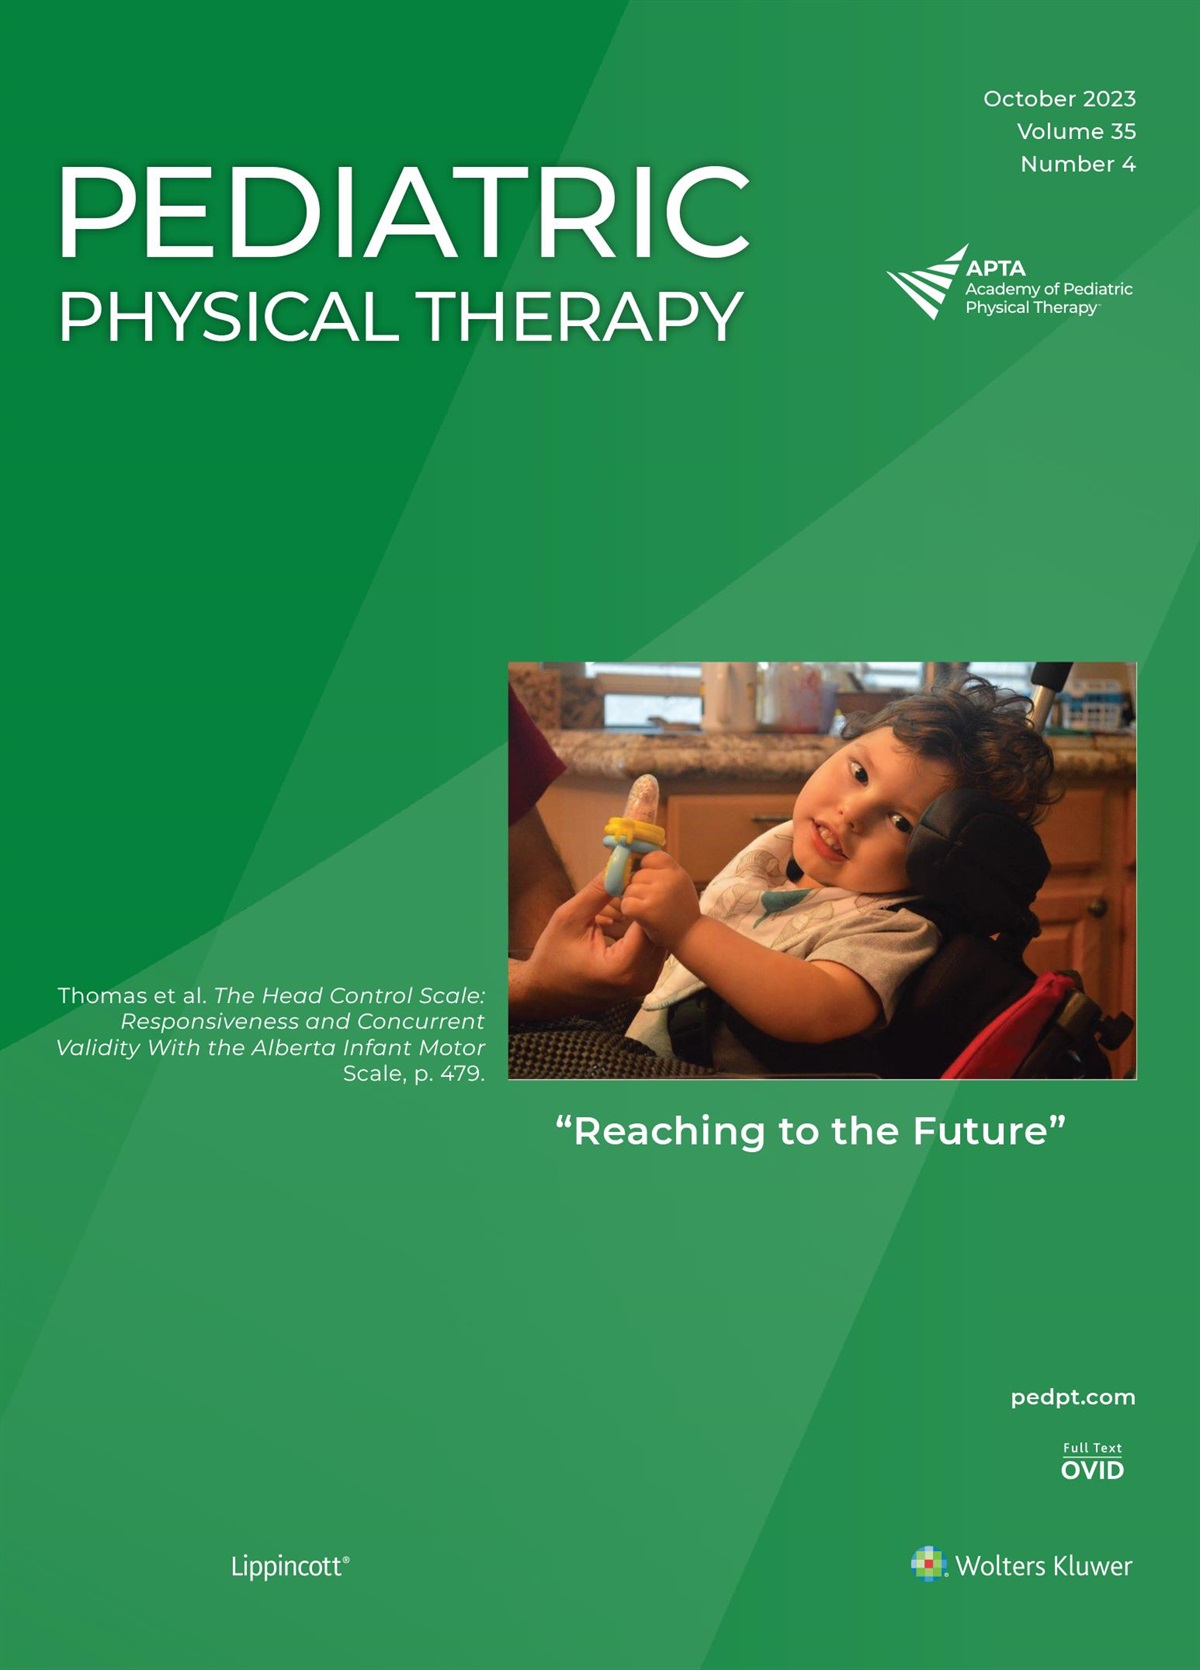 Abstracts of Poster Presentations for the Academy of Pediatric Physical Therapy Annual Conference 2023